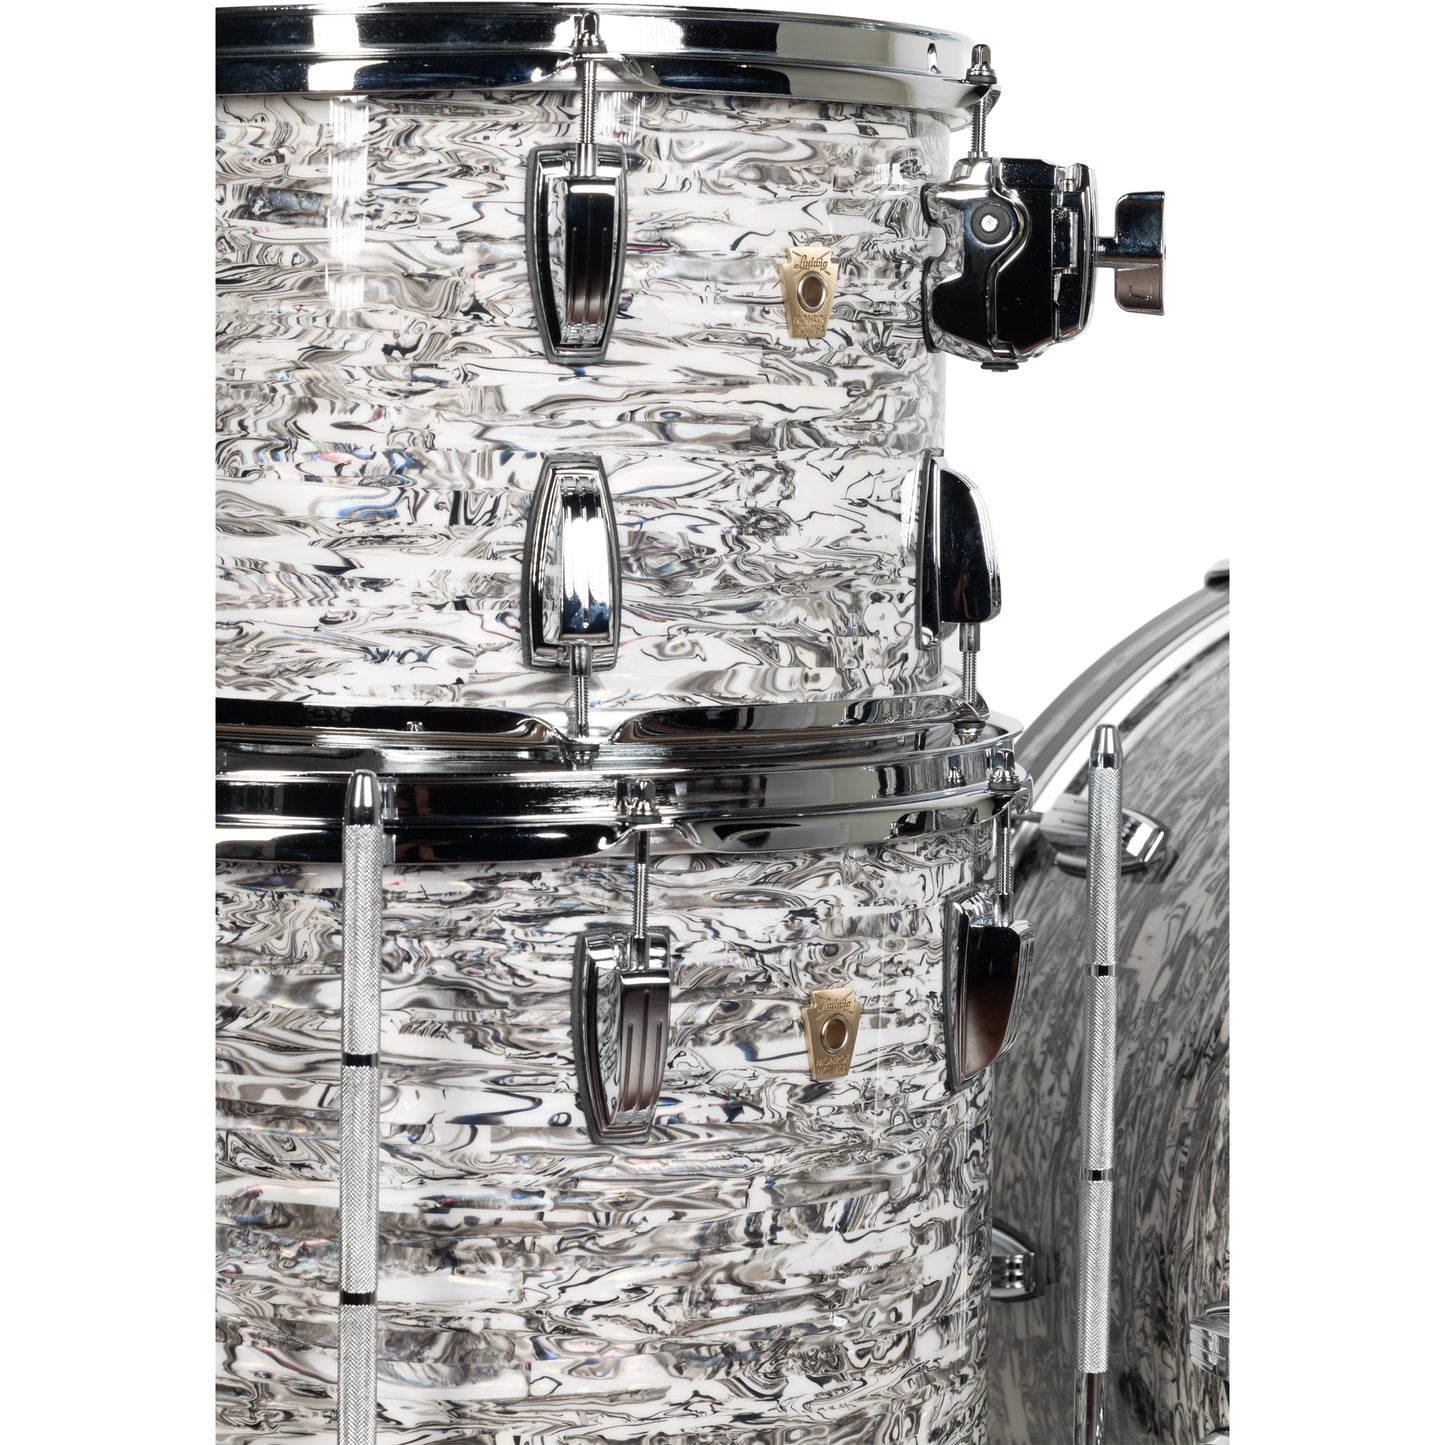 Ludwig Classic Maple Limited Edition 3-Piece Shell Kit - White Abalone